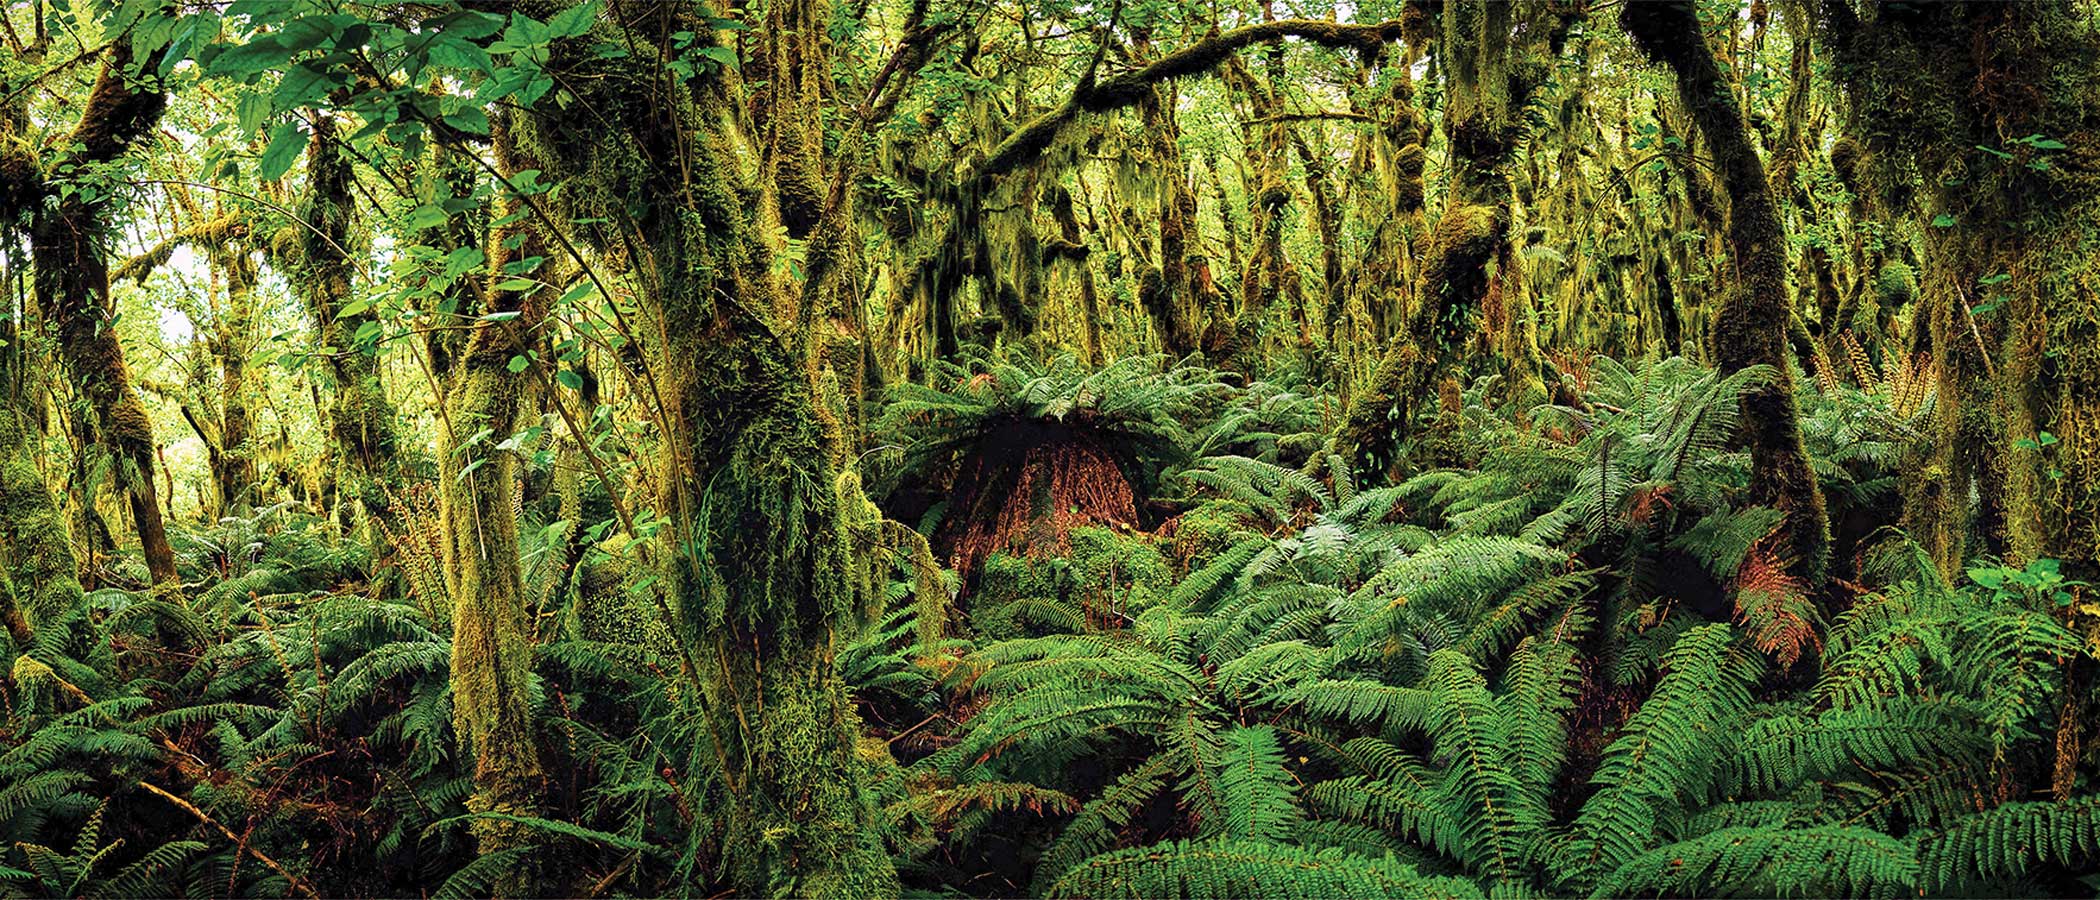 Moss, fern, and southern beech trees in Fiordland National Park on the South Island of New Zealand.